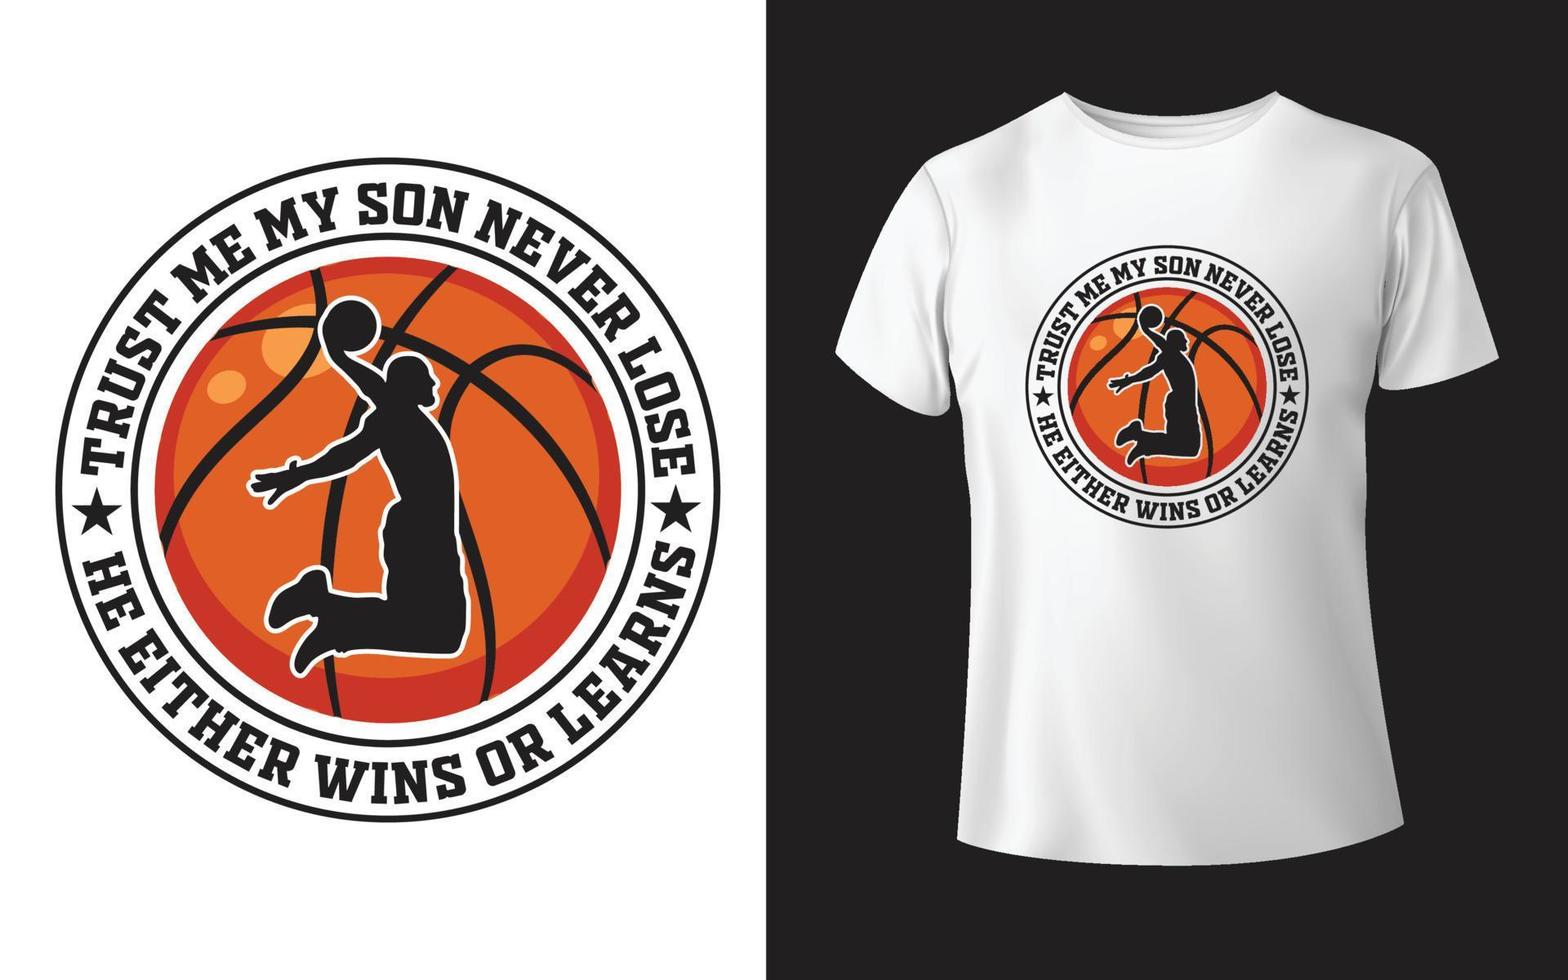 Trust me my son never loses he either wins or learns t-shirt design - Vector graphic, typographic poster, vintage, label, badge, logo, icon or t-shirt